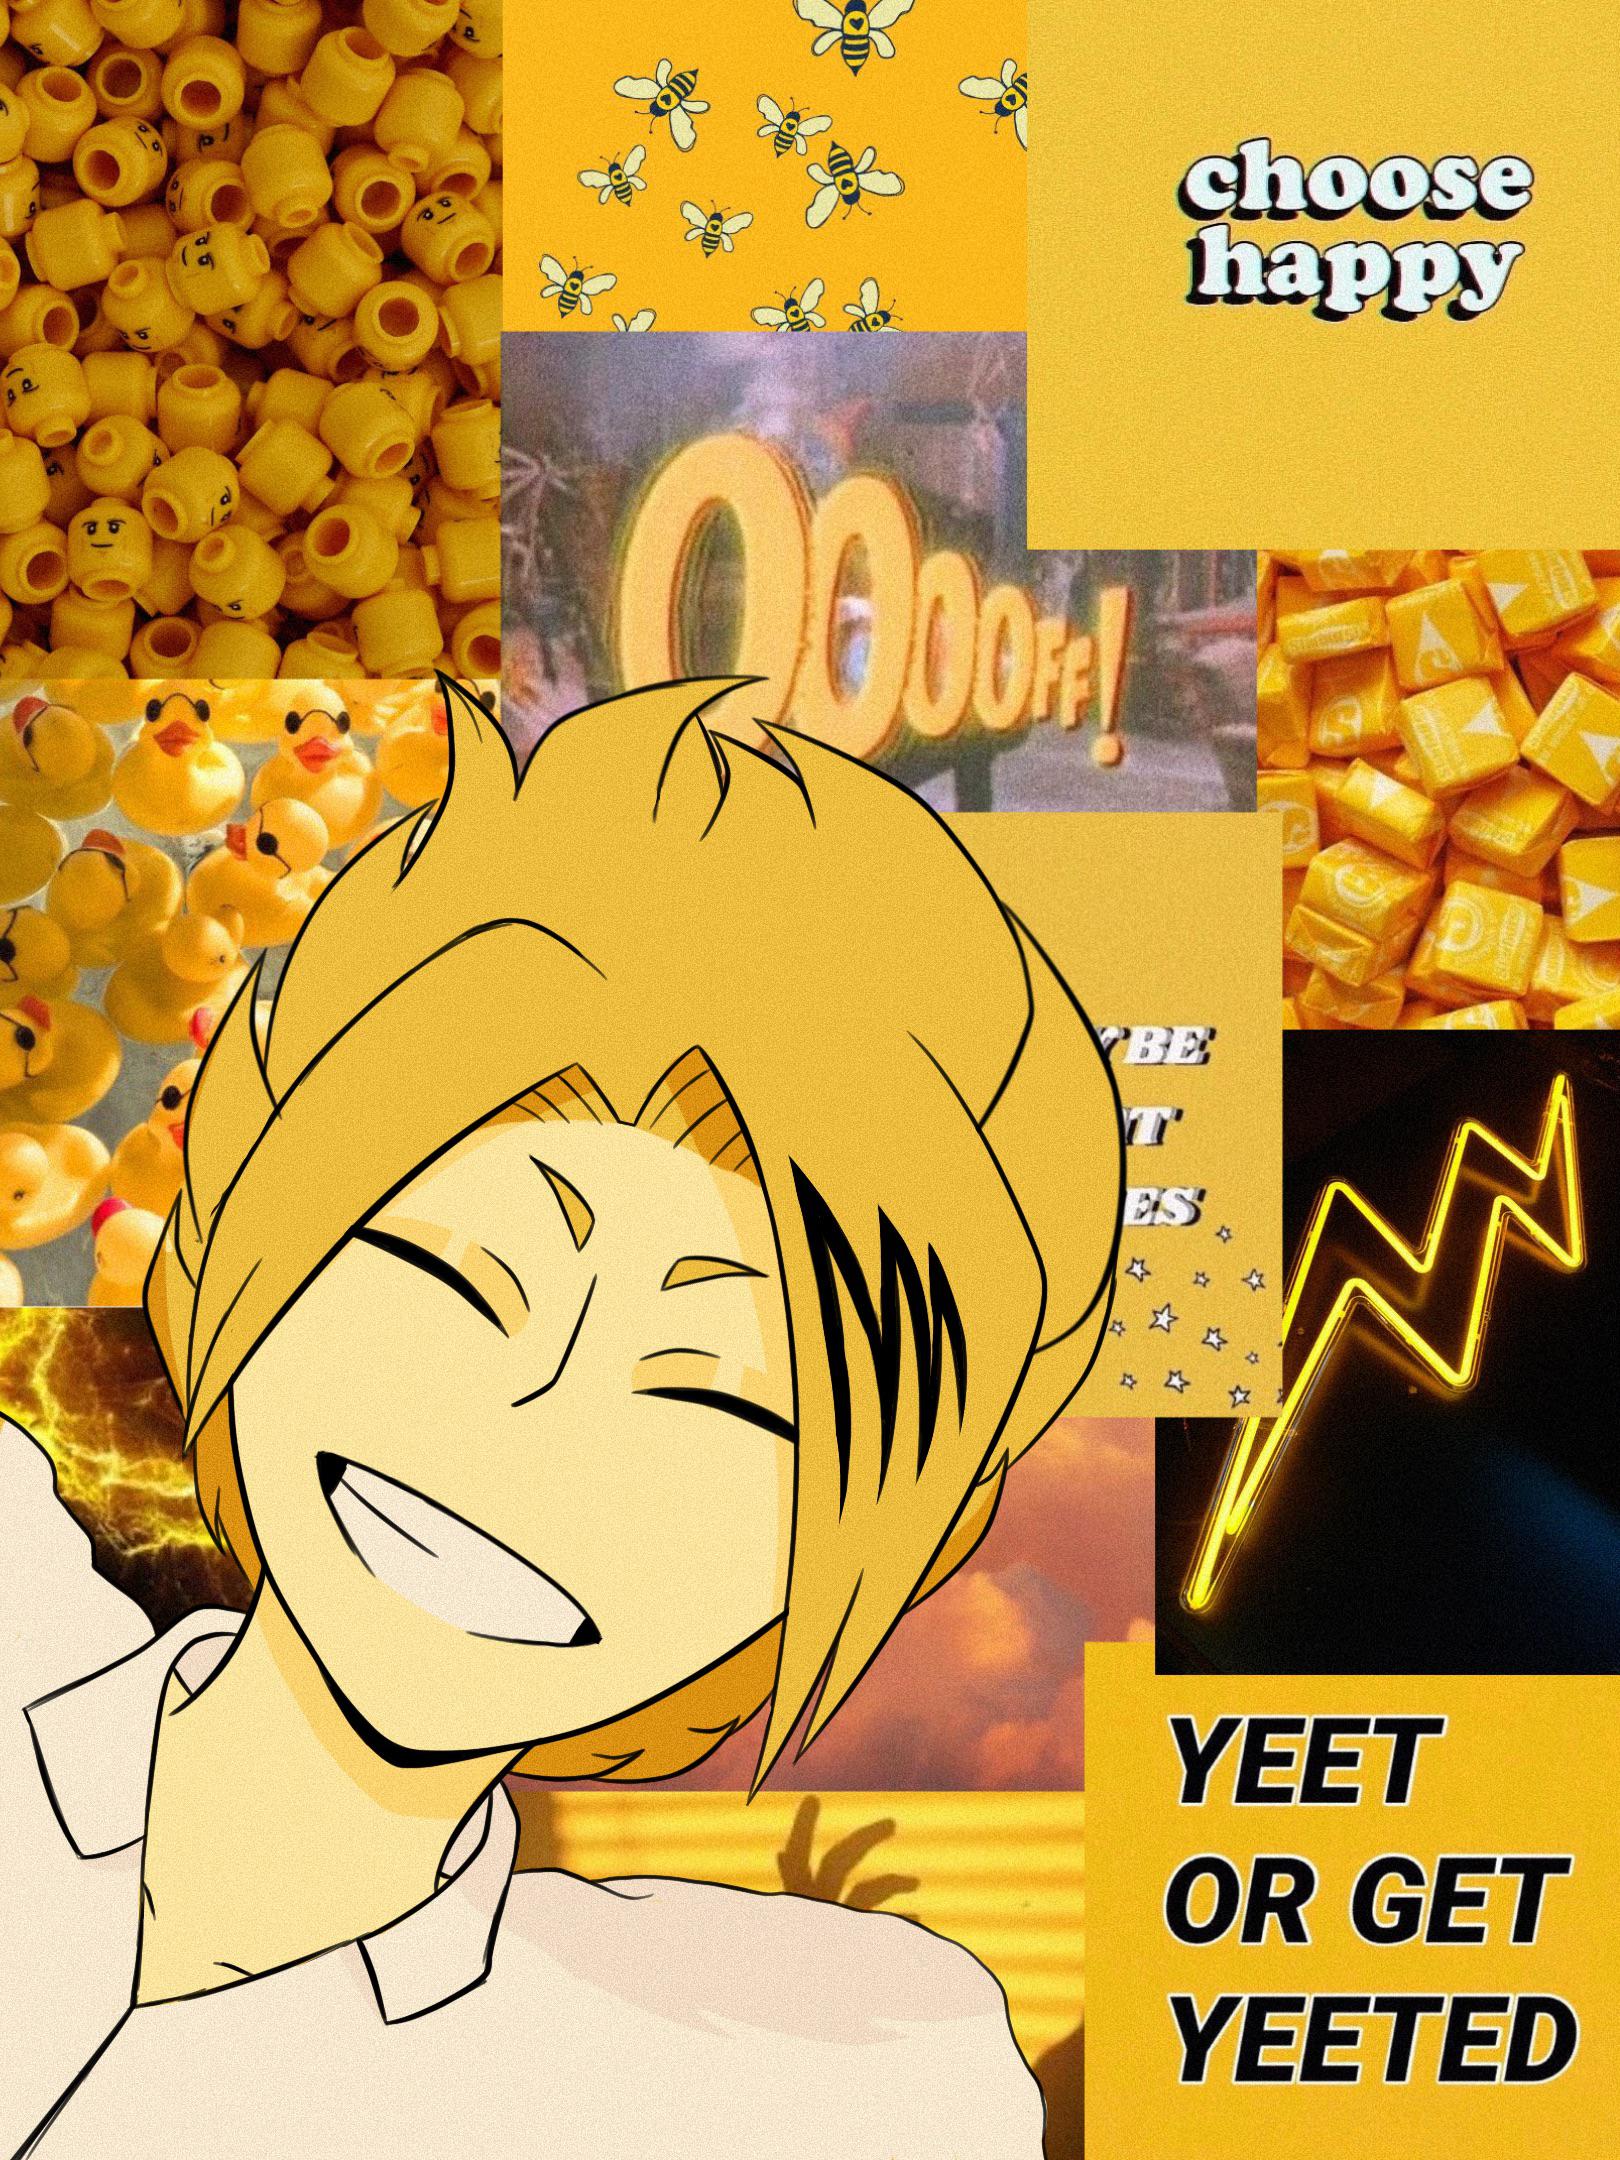 A collage of yellow aesthetic pictures including rubber ducks, yellow lightning bolts, and a picture of a blonde man smiling - Denki Kaminari